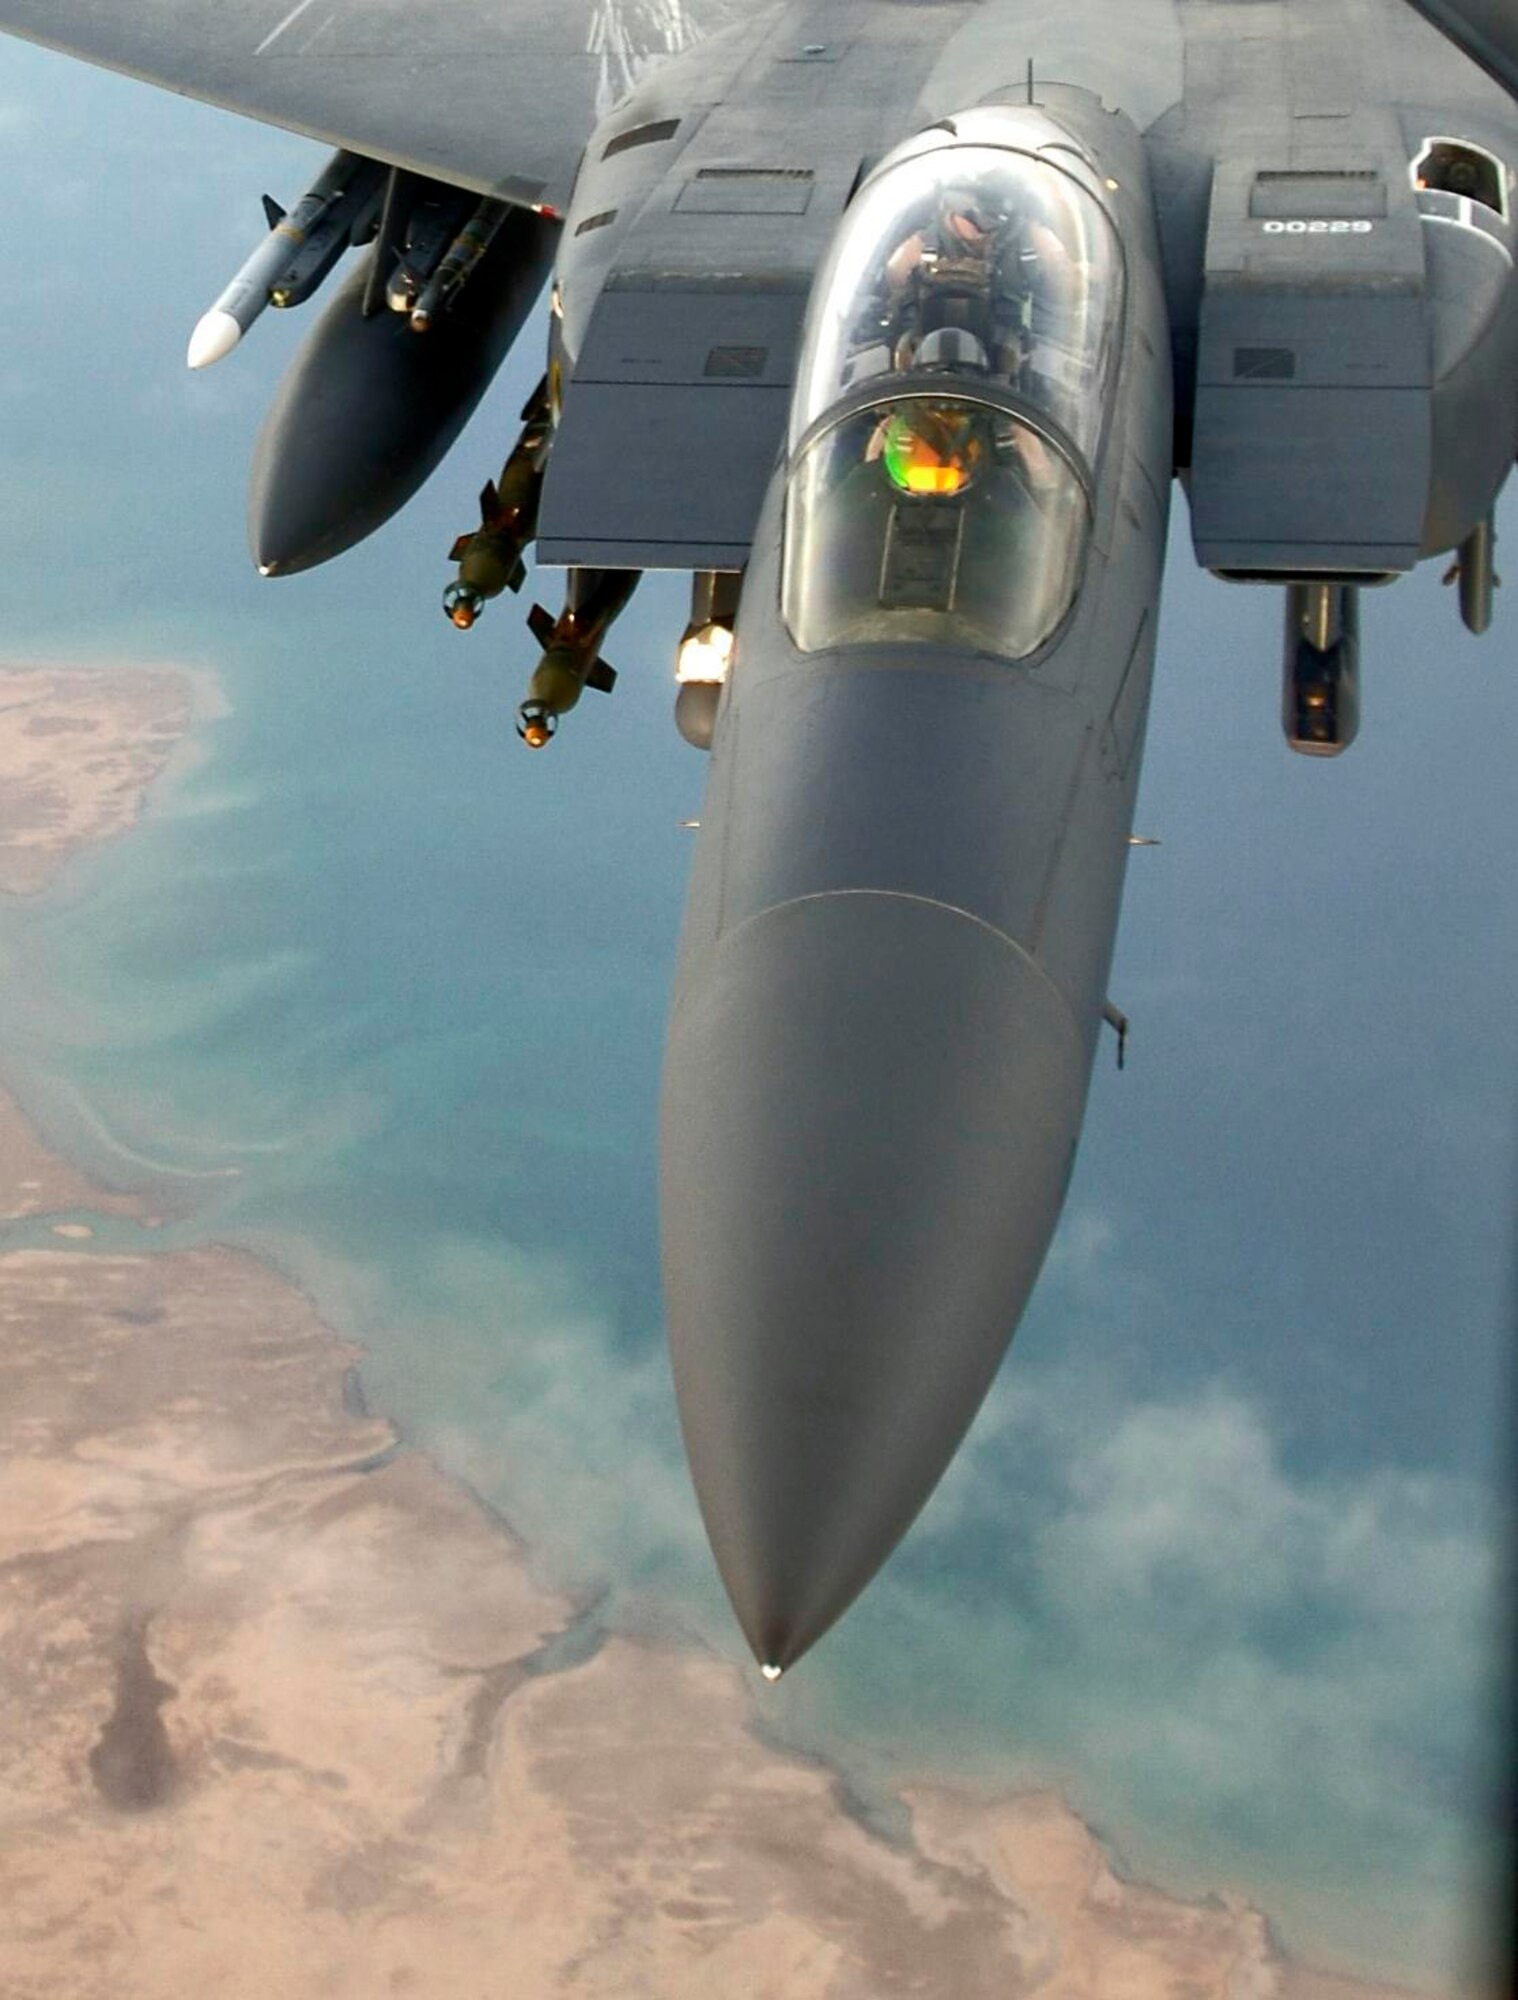 An F-15E Strike Eagle flies over a forward-deployed location in Southwest Asia. Aircraft like this are capable of monitoring the battlespace with their targeting pods. This concept is known as non-traditional intelligence, surveillance and reconnaissance. (U.S. Air Force photo/Master Sgt. Lance Cheung)